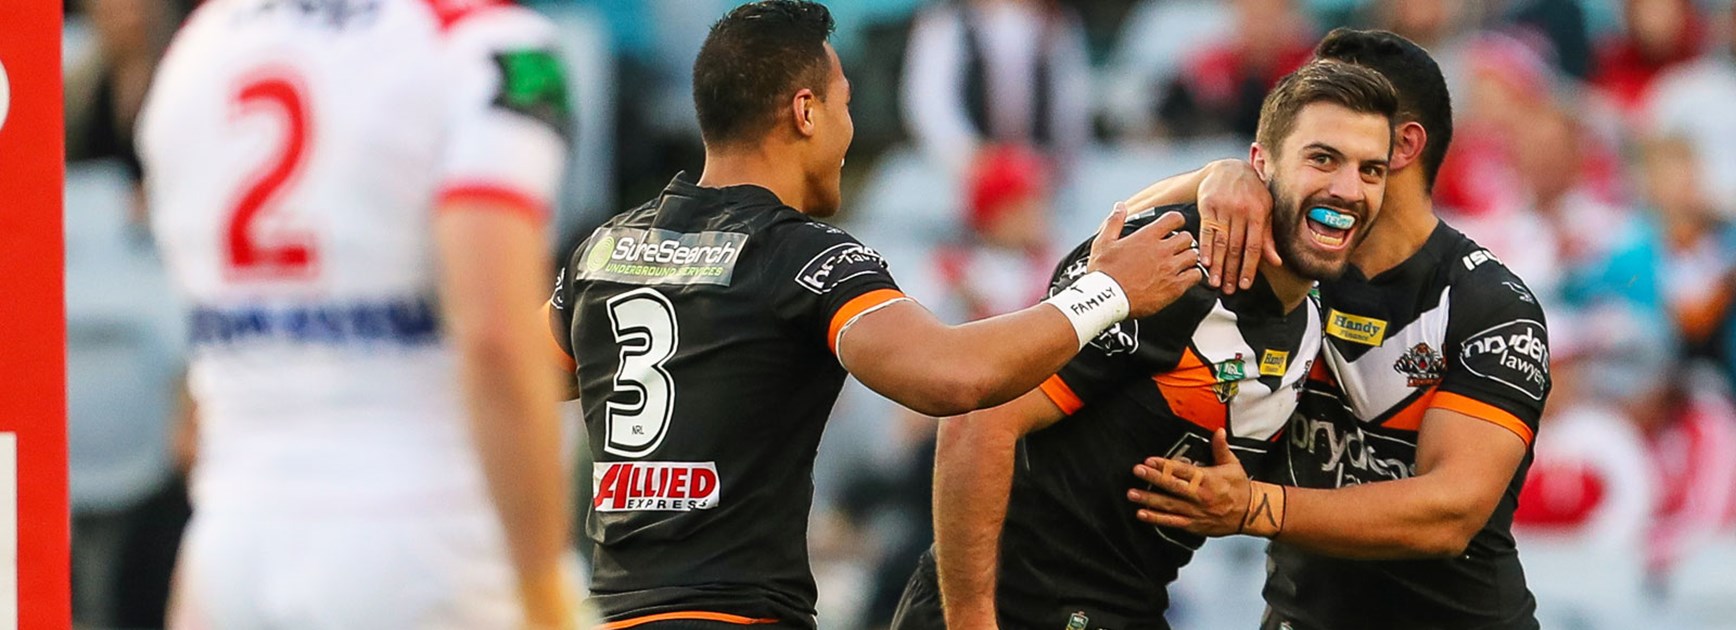 Wests Tigers fullback James Tedesco celebrates against the Dragons in Round 20.